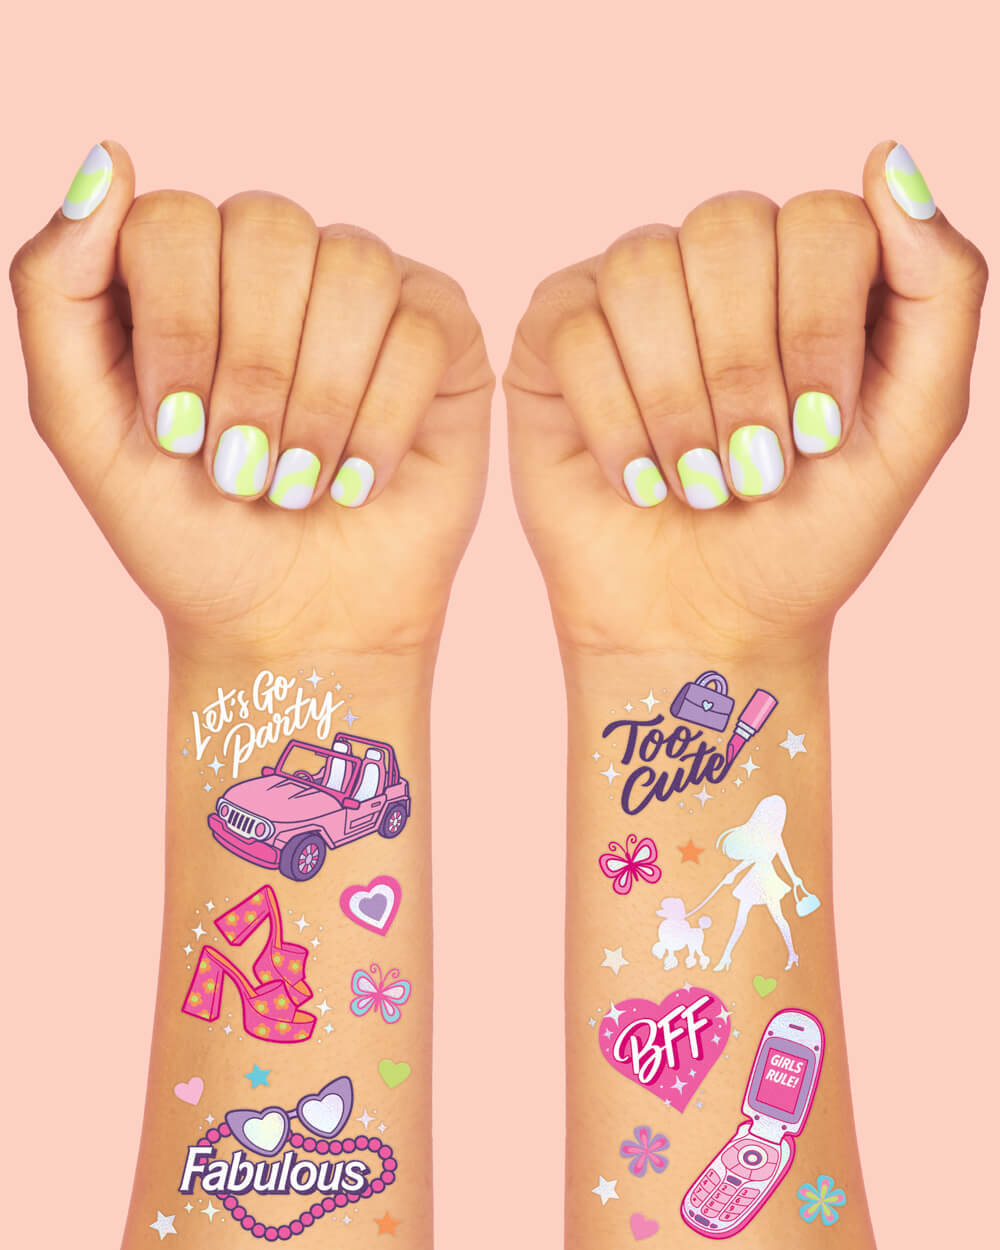 Let's Go Party Tats - 42 foil temporary tattoos